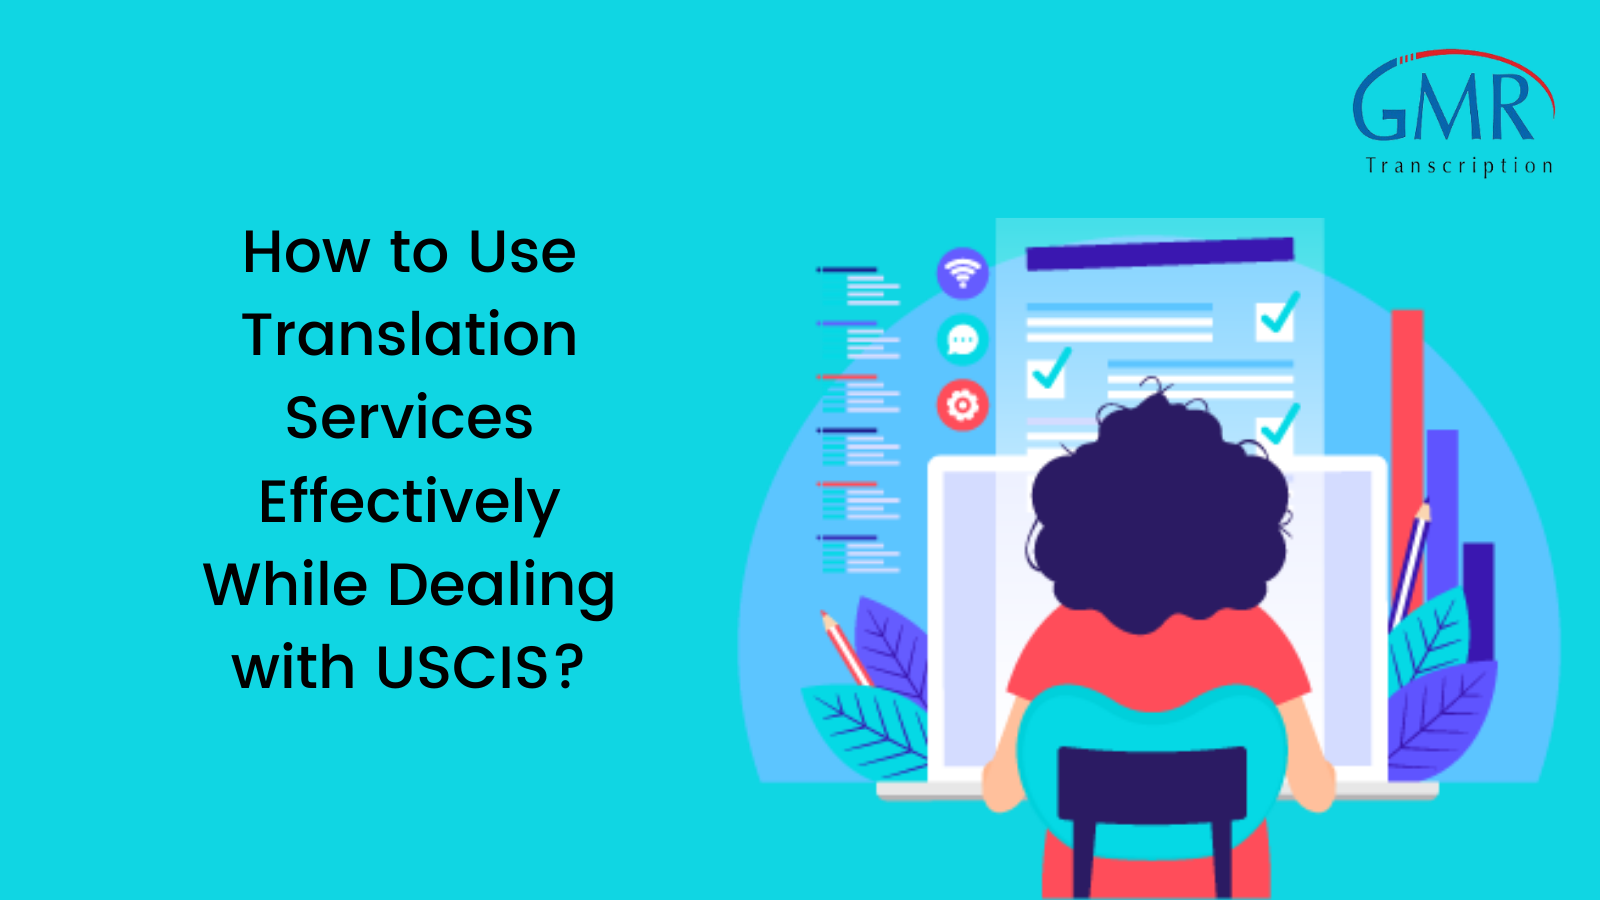 How to Use Translation Services Effectively While Dealing with USCIS?